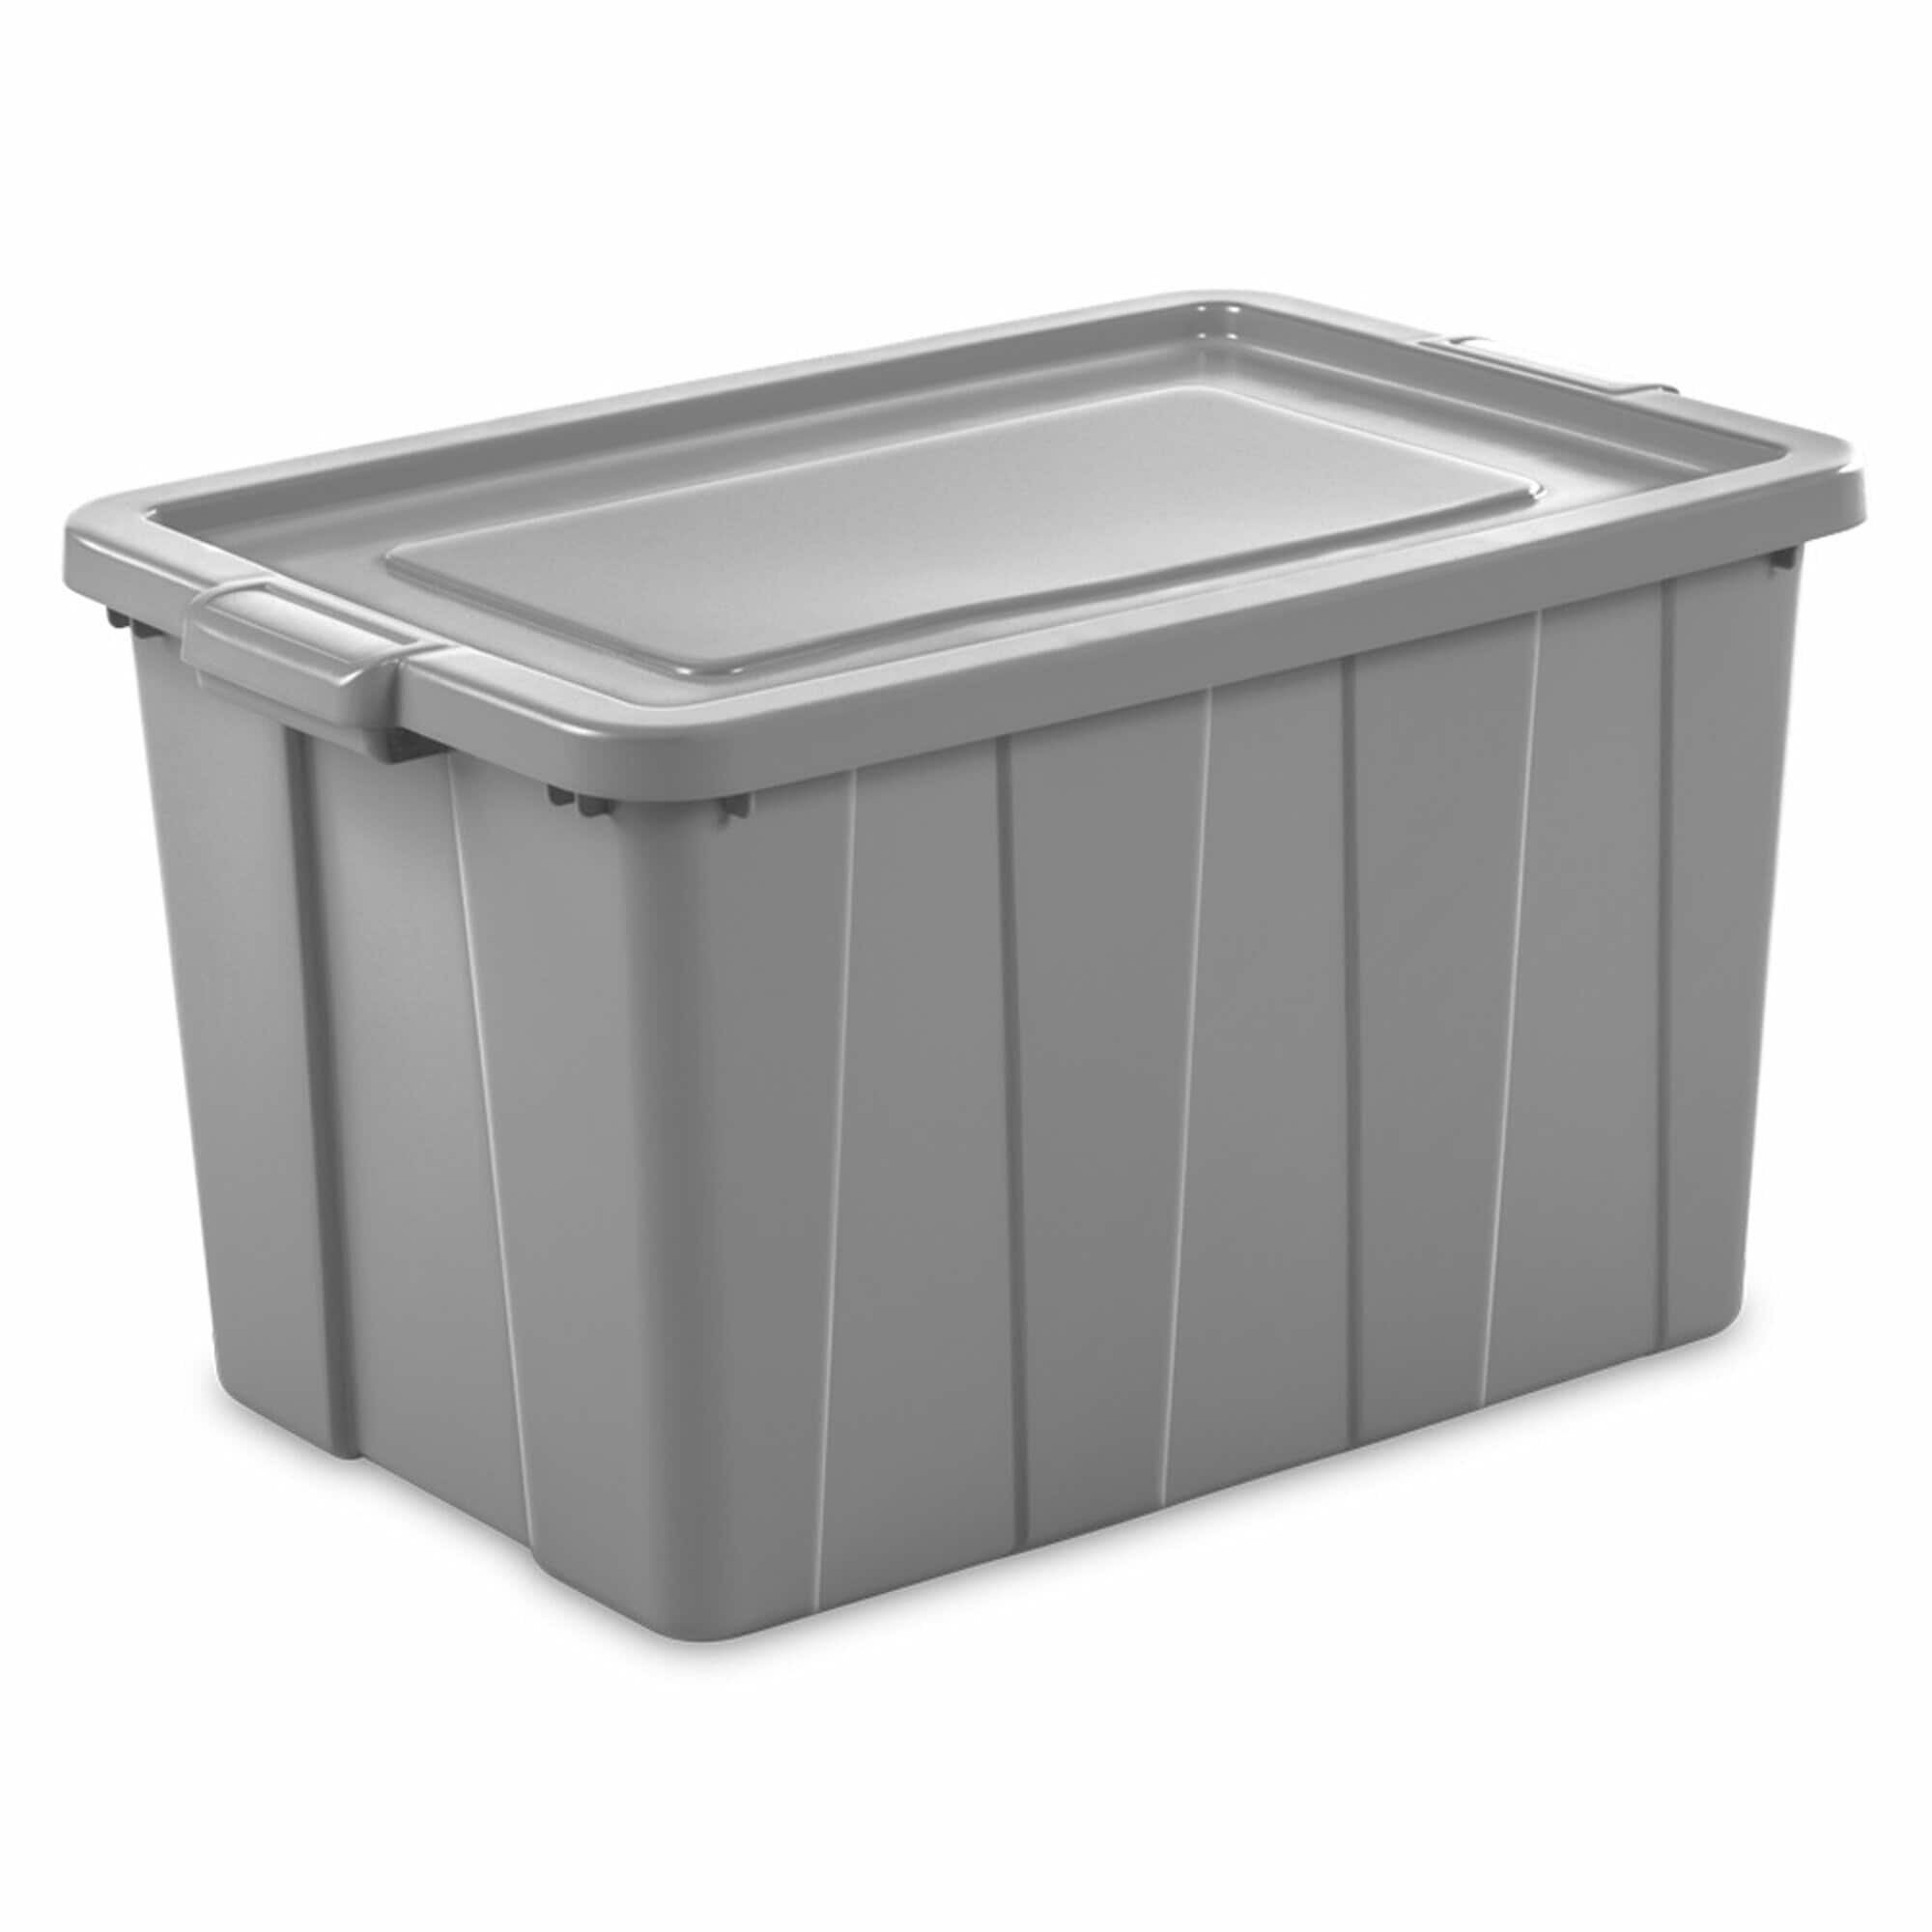 Sterilite 20 Gallon Stackable Plastic Storage Tote Container Bin with  Latching Lid for Home and Garage Organization, Gray (6 Pack)